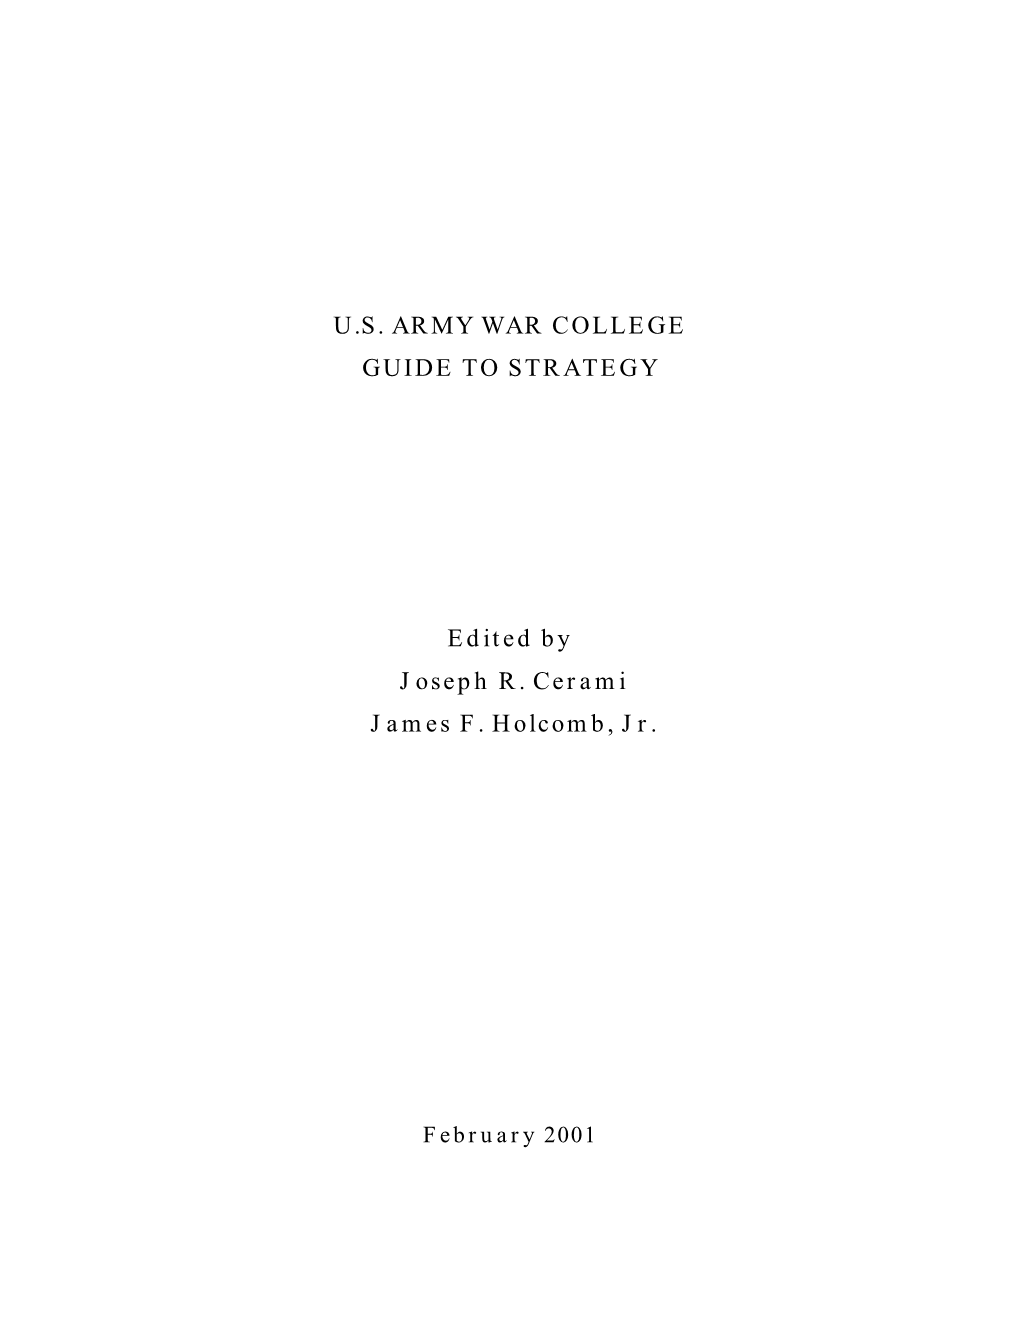 U.S. Army War College Guide to Strategy